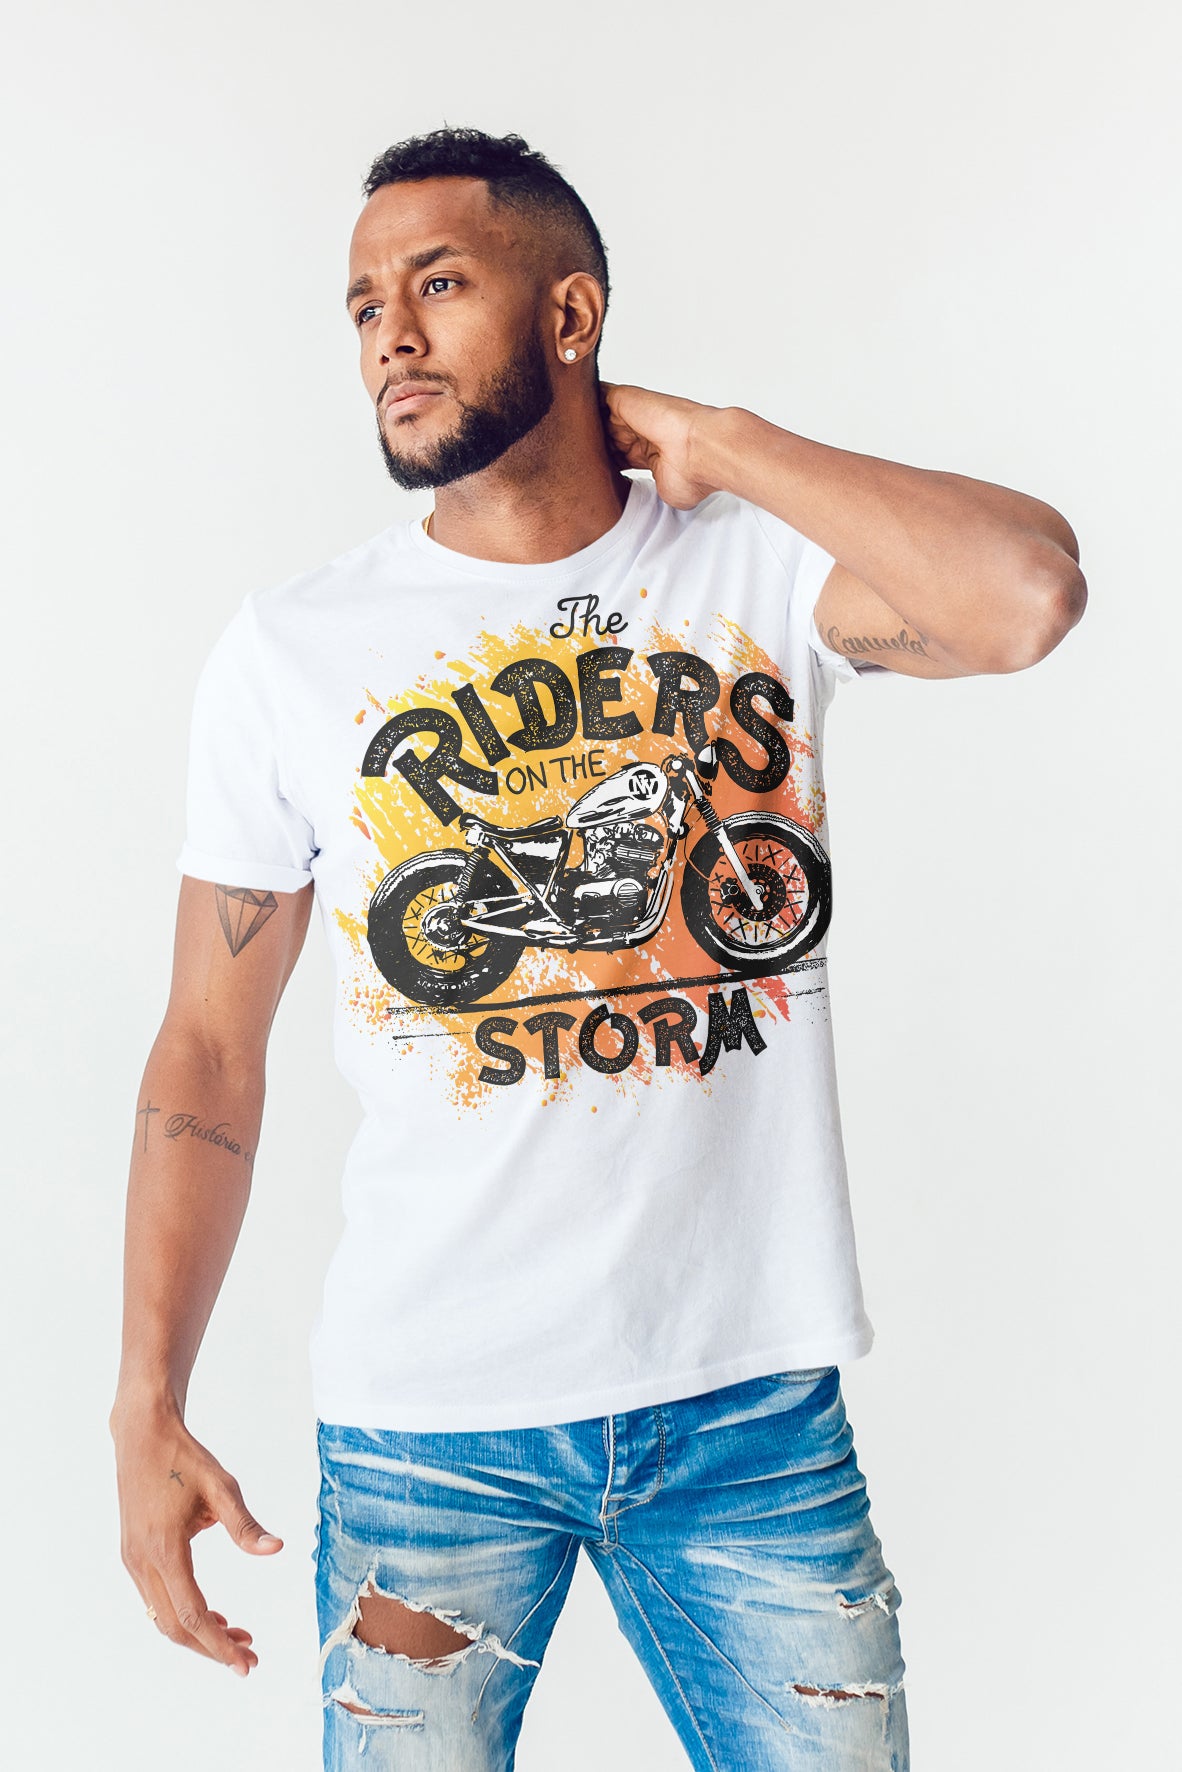 "THE RIDERS ON THE STORM" T-shirt